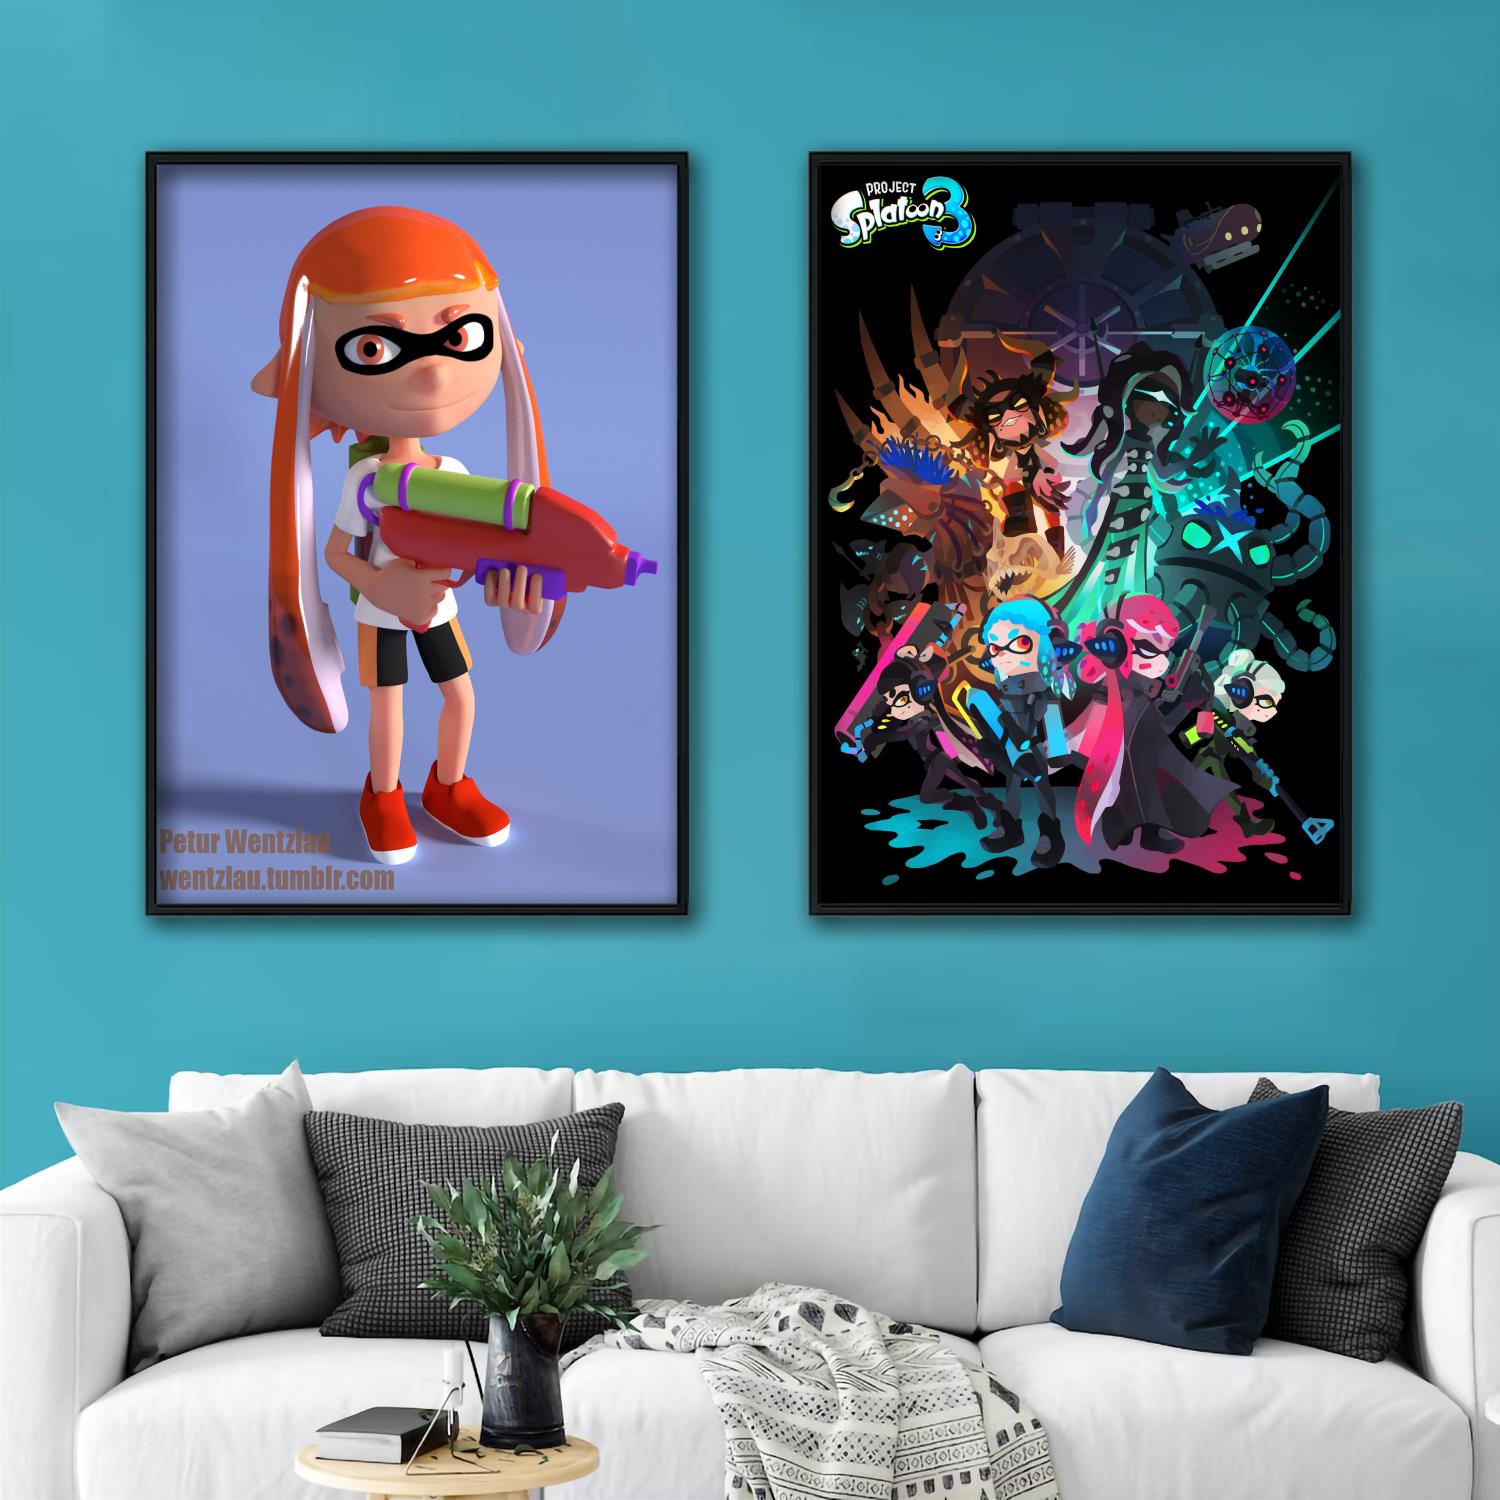 Splatoon Character Stack poster Decorative Canvas Posters Room Bar Cafe Decor Gift Print Art Wall Paintings - Splatoon Plush